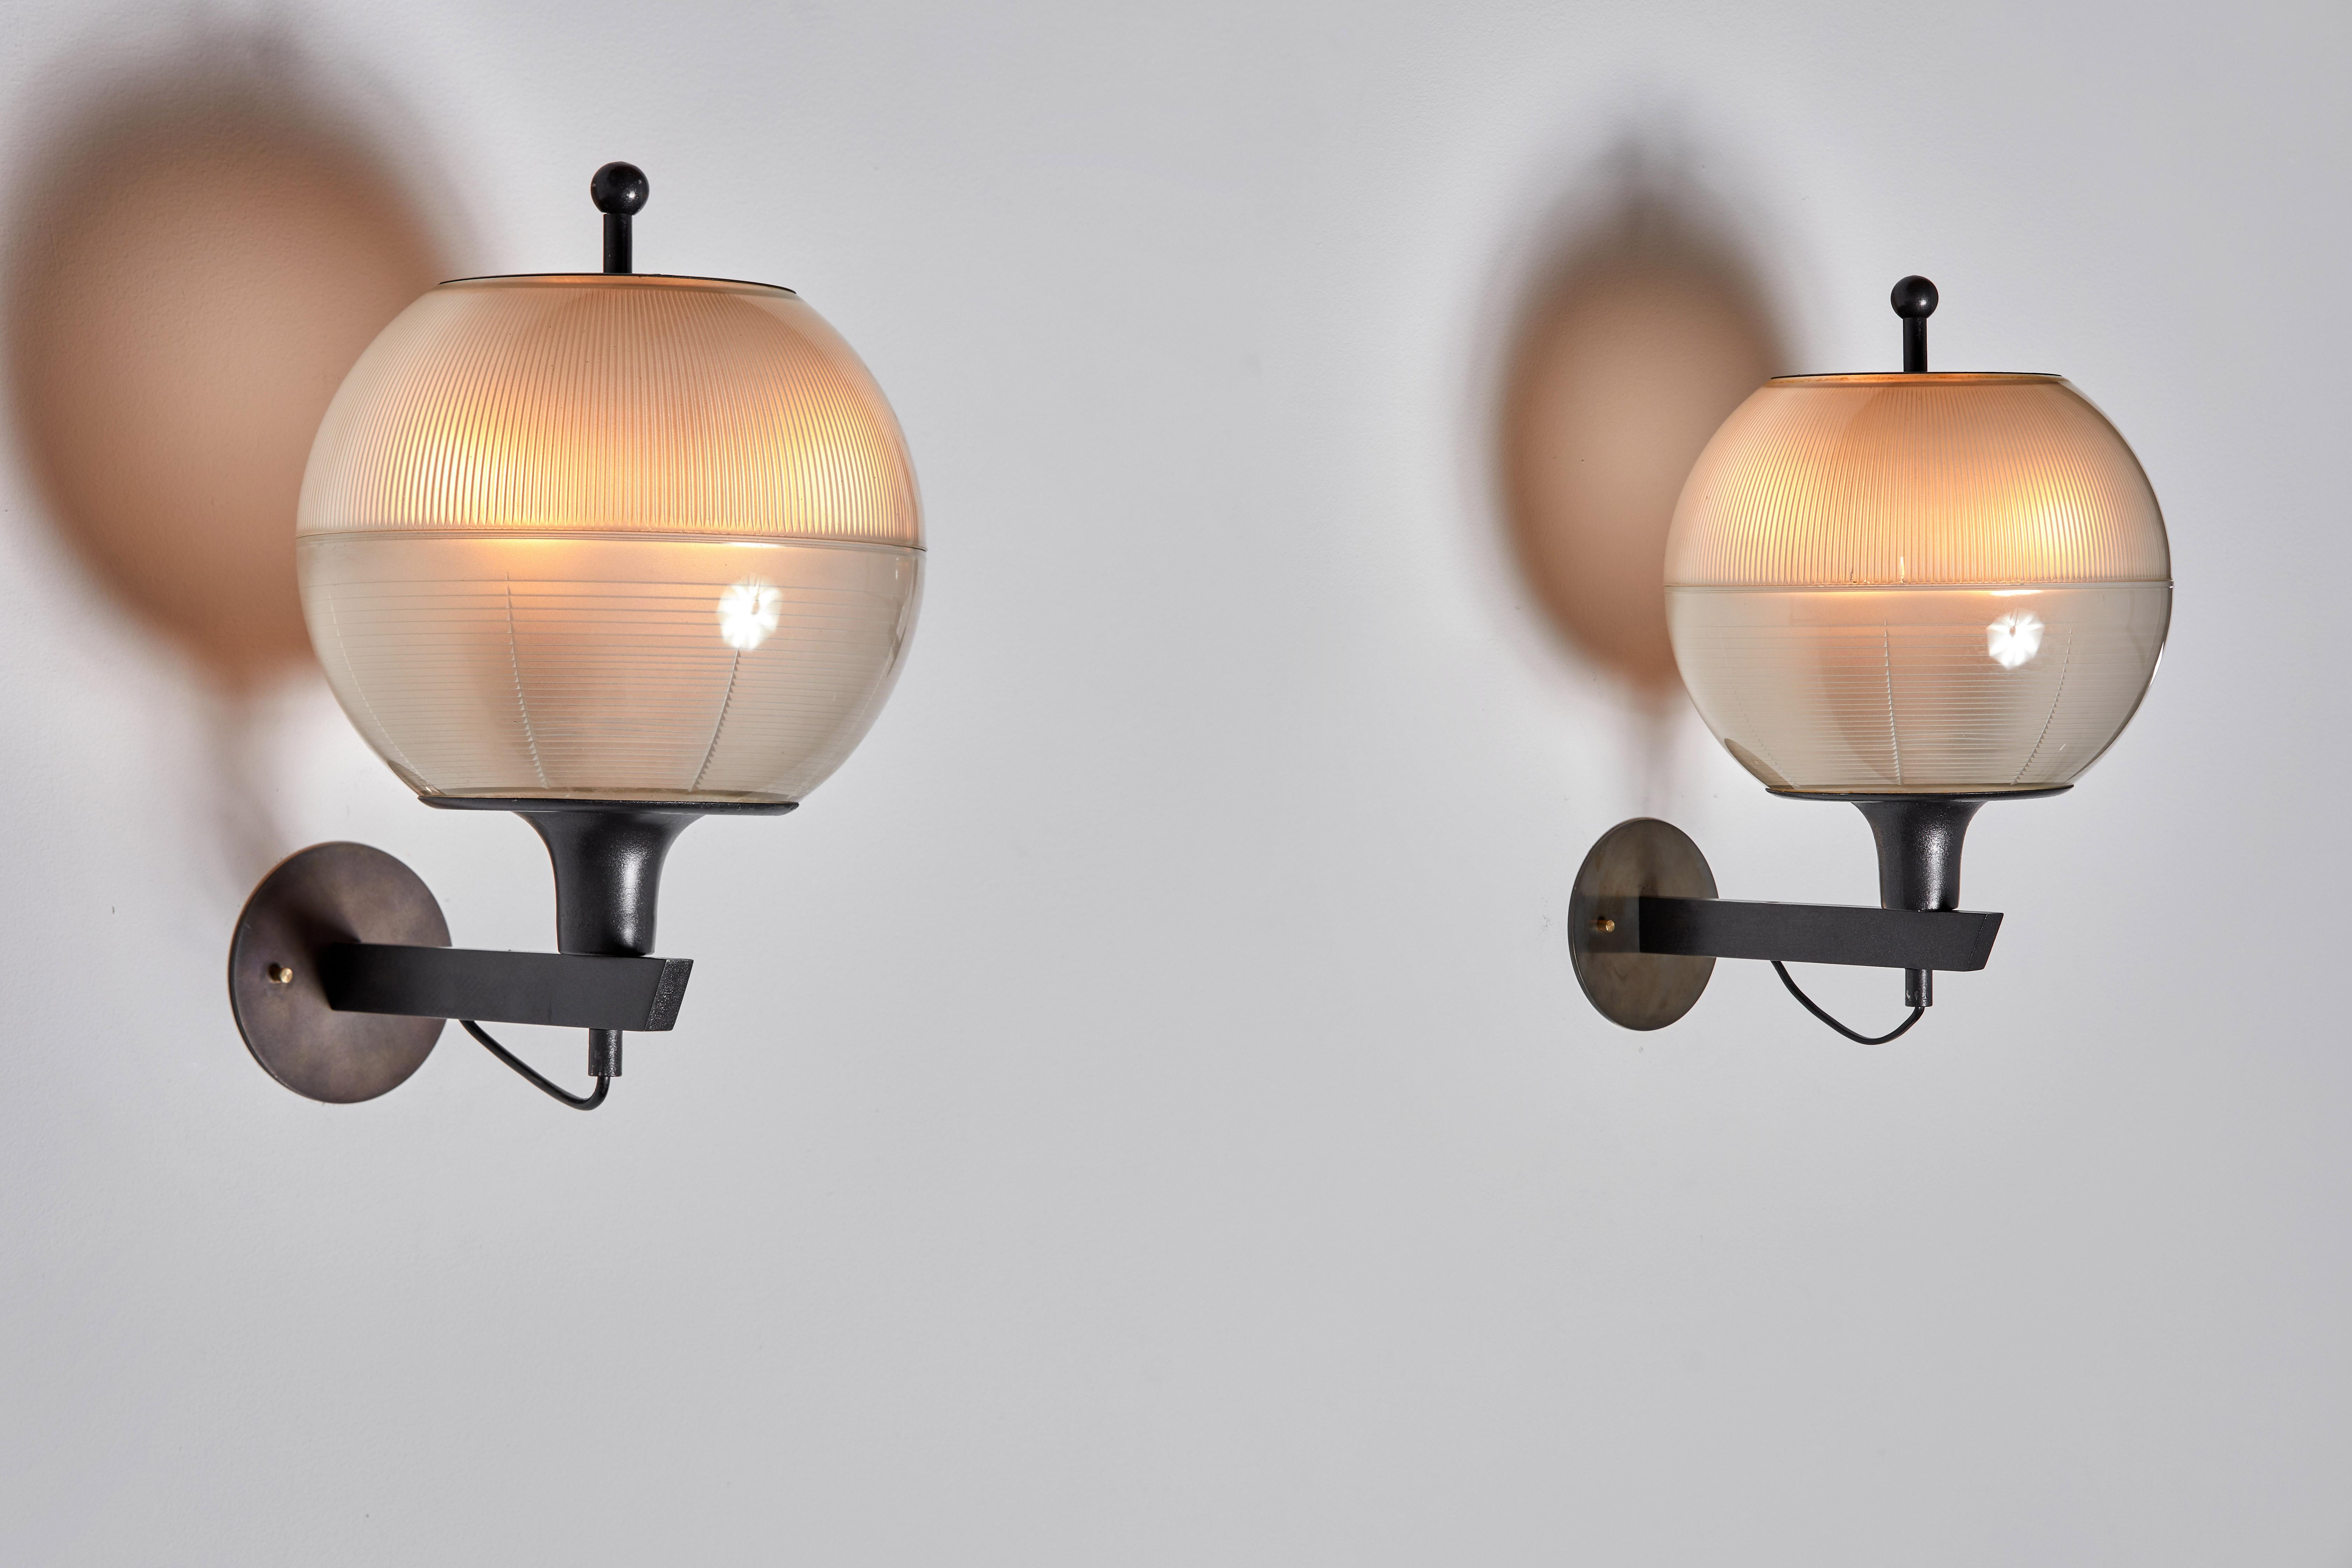 Pair of Italian Sconces. Designed and manufactured in Italy, circa 1960's. Blackened steel, Holophane glass diffuser. Custom backplates. Rewired for U.S. junction boxes. Each light takes one E27 100w maximum bulb. Bulbs provided as a one time